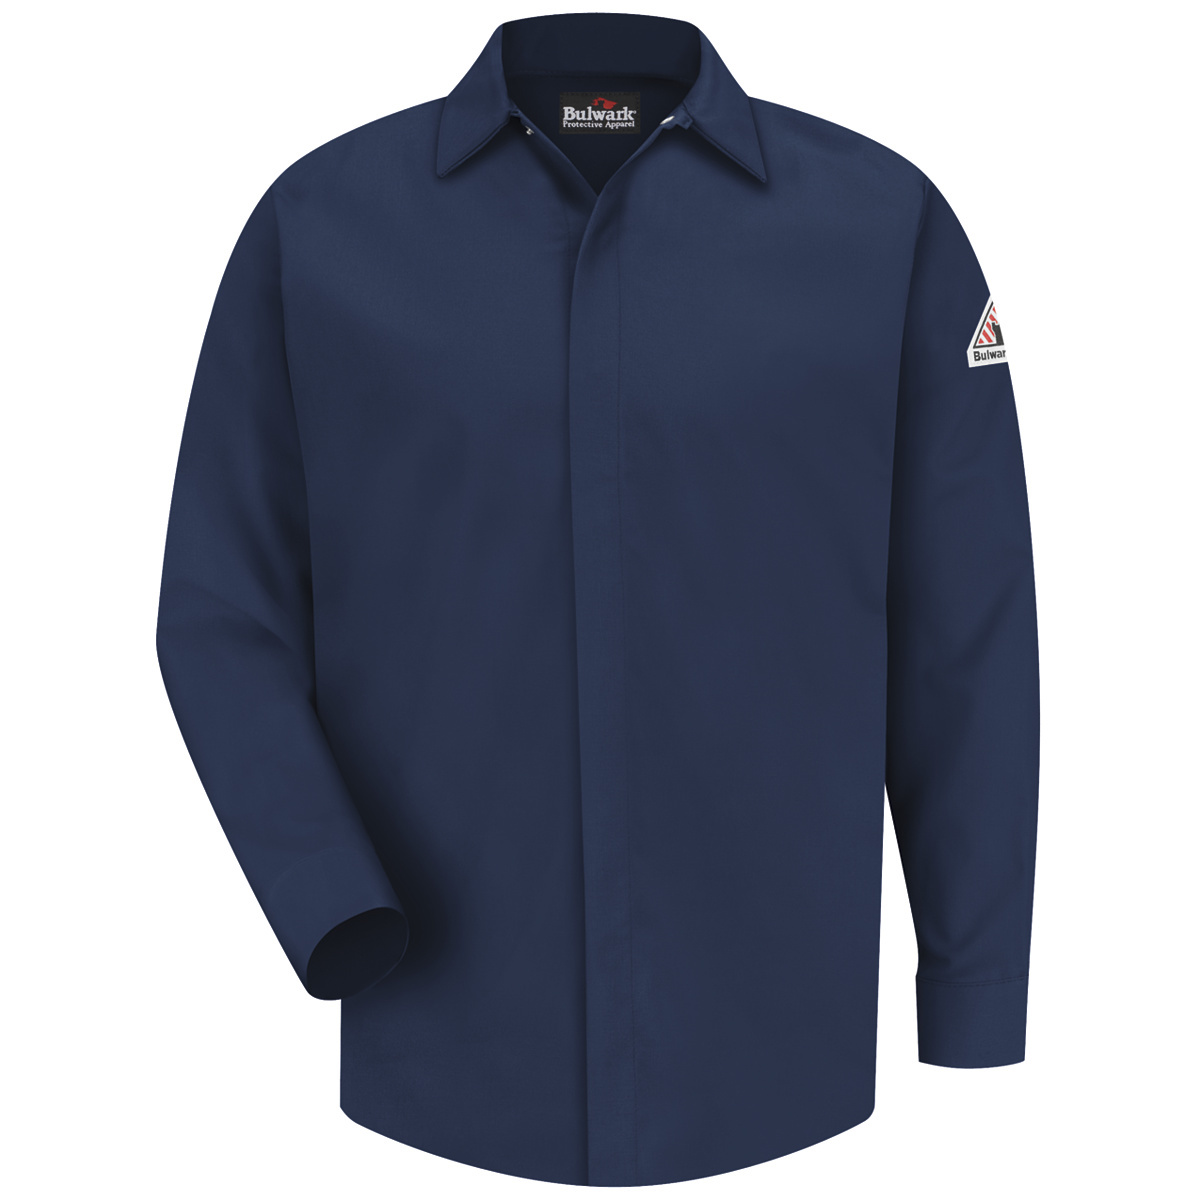 Bulwark® Large Regular Navy Blue CoolTouch®/Modacrylic/Lyocell/Aramid Flame Resistant Work Shirt With Gripper Front Closure